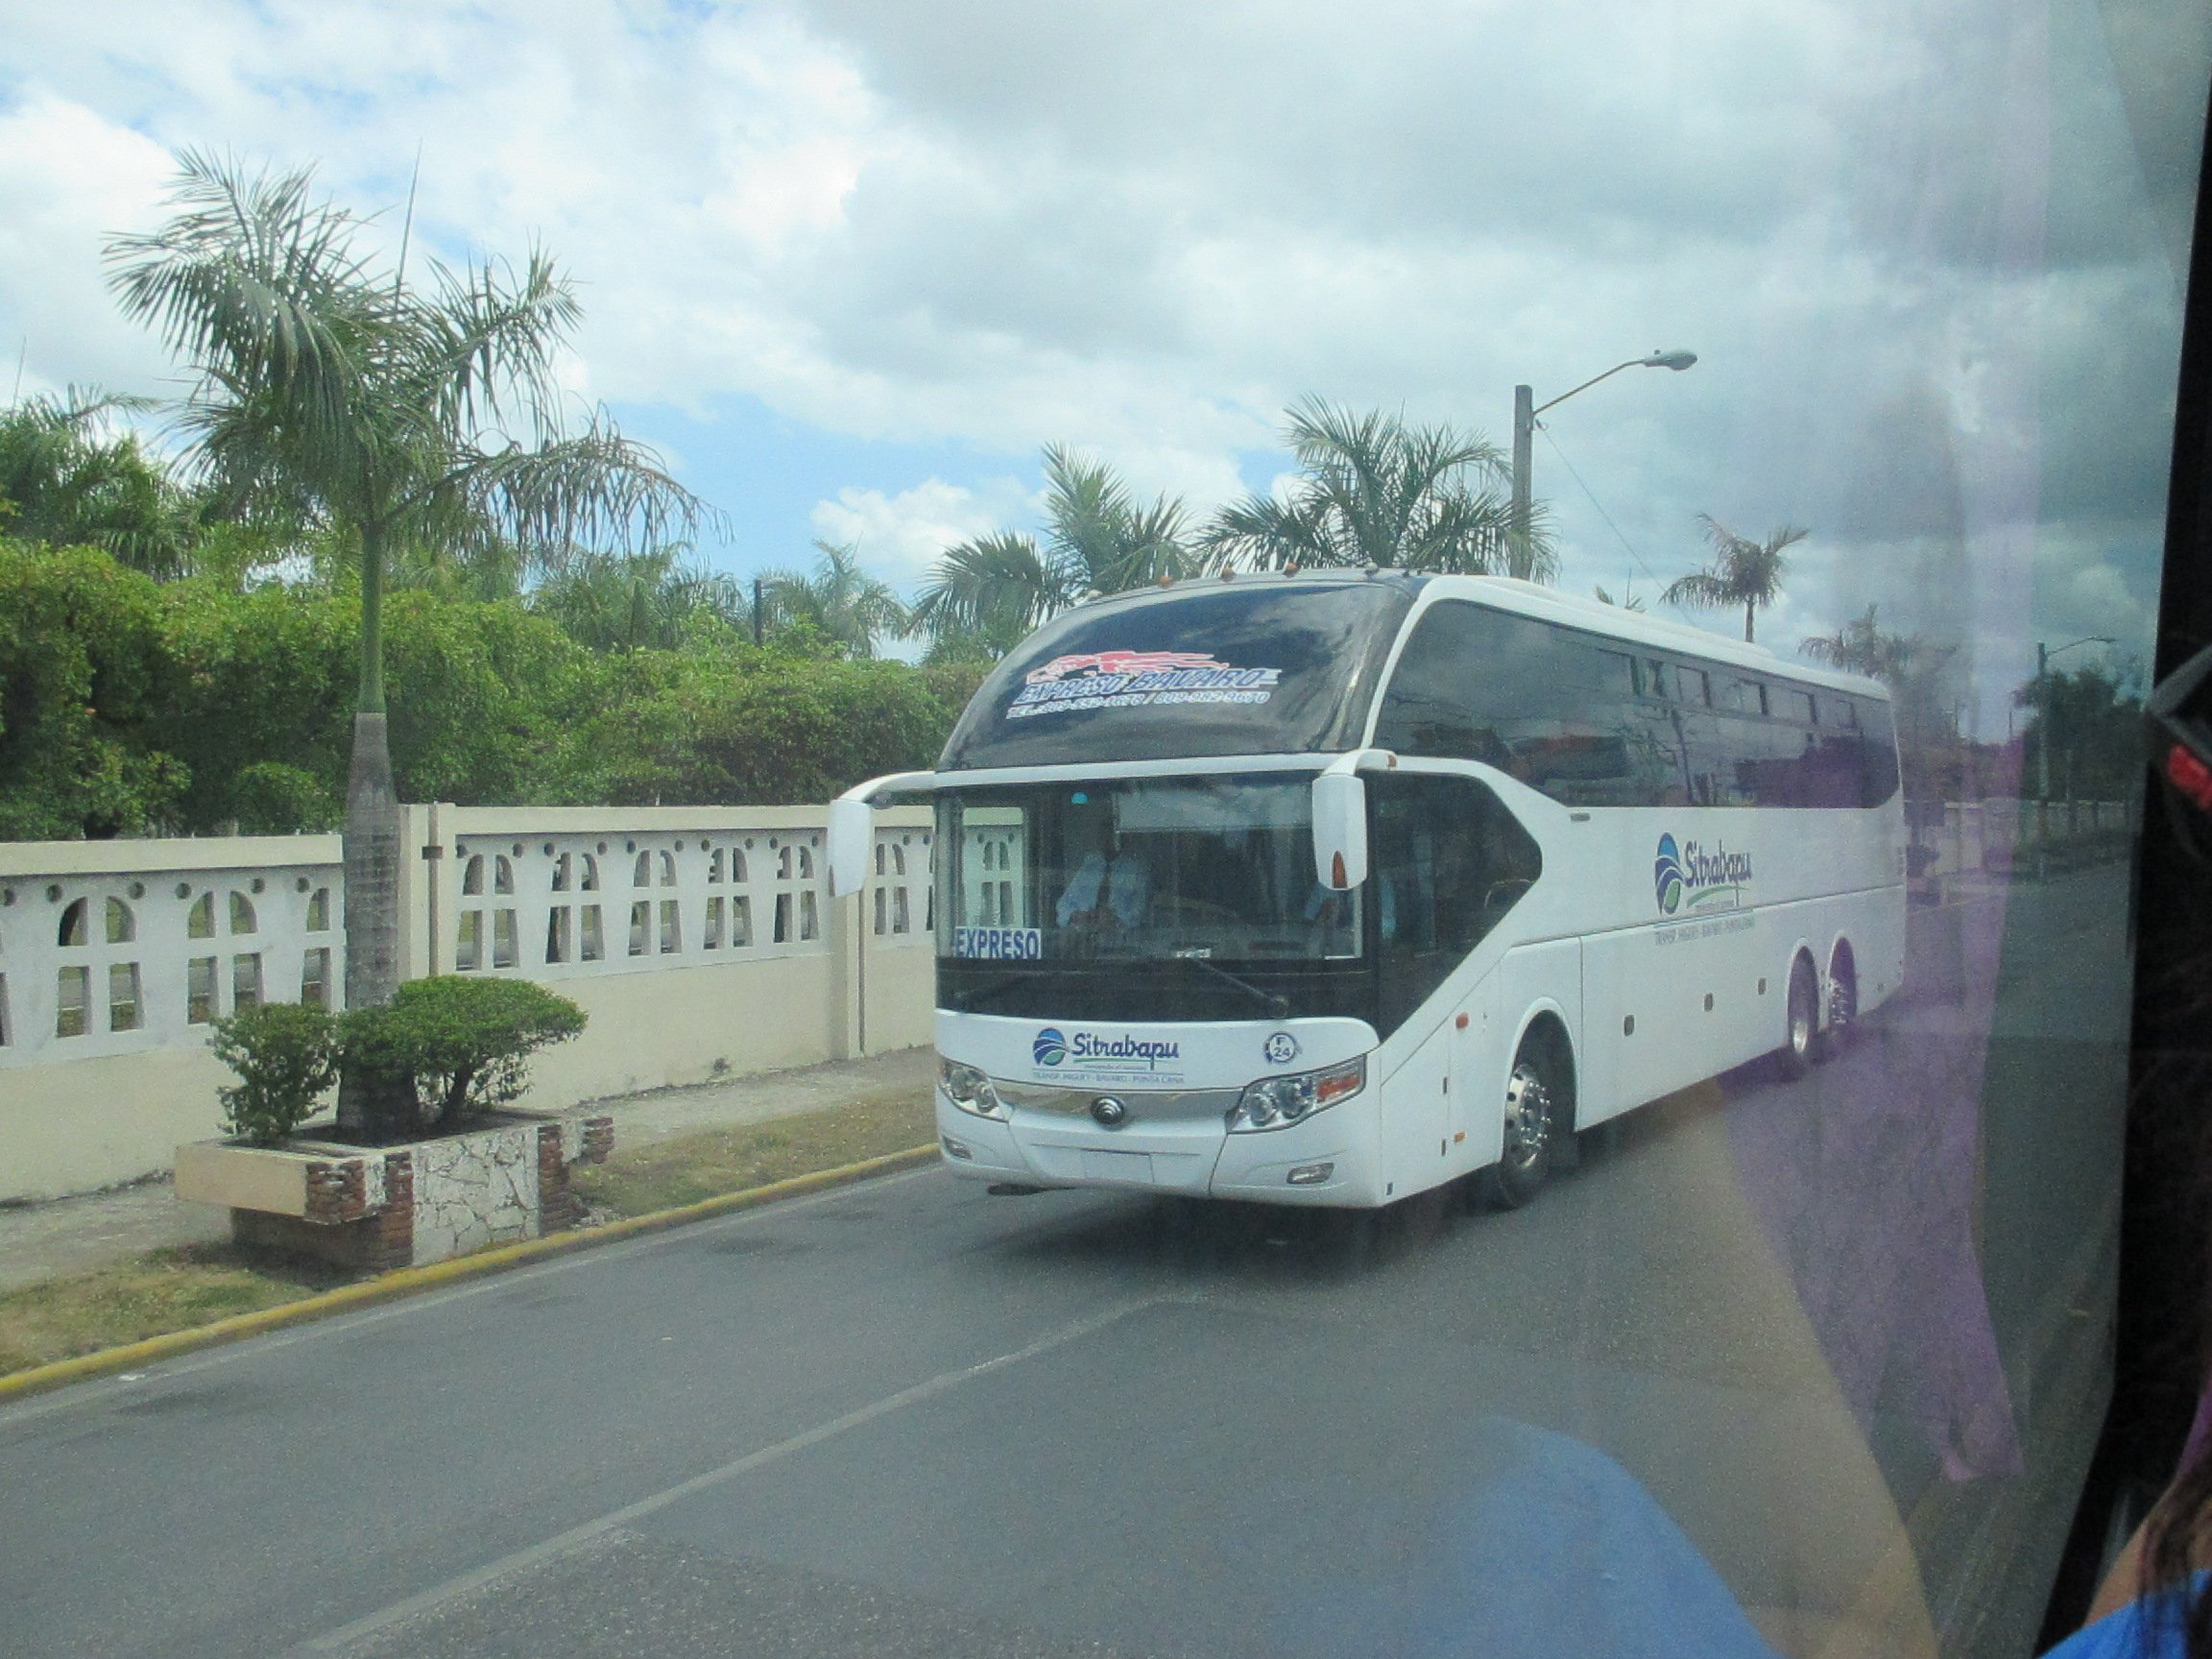 
How To Get From Punta Cana Airport to Samana - All Possible Ways, cheapest way from Punta Cana to Samana, Punta Cana to Samana, Punta Cana to Samana bus, Punta Cana airport to Samana